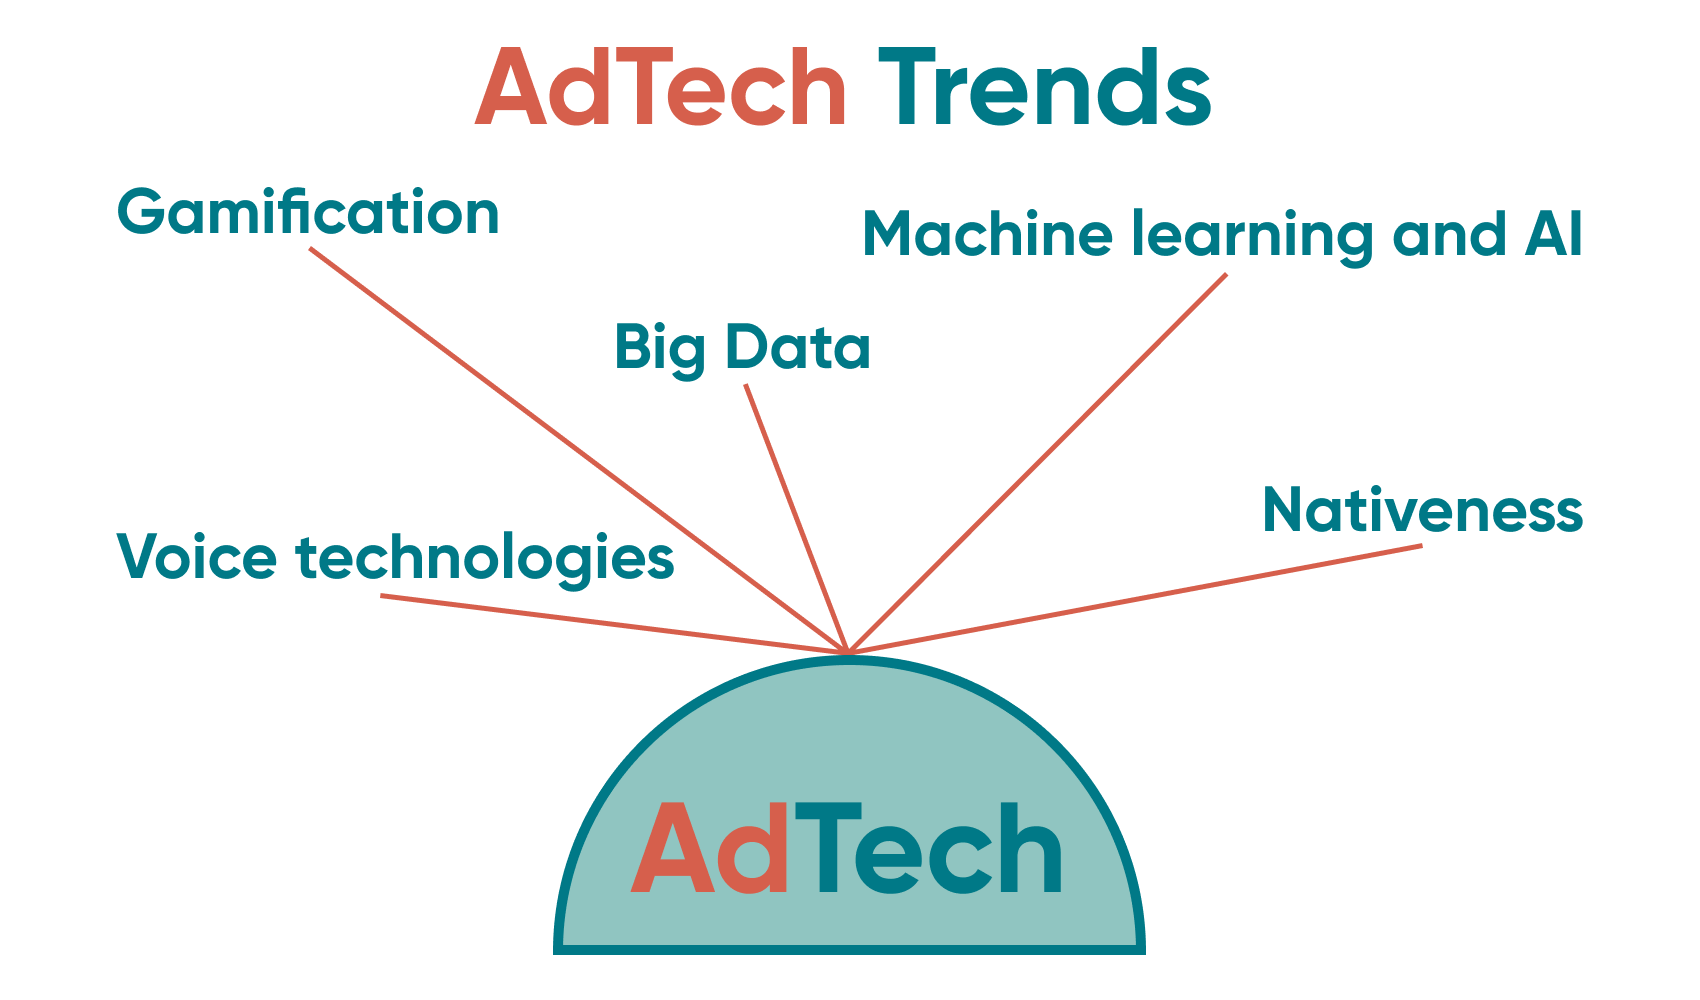 Times are changing and even in the AdTech industry there are trends to follow. Some aspects are more stable than other.